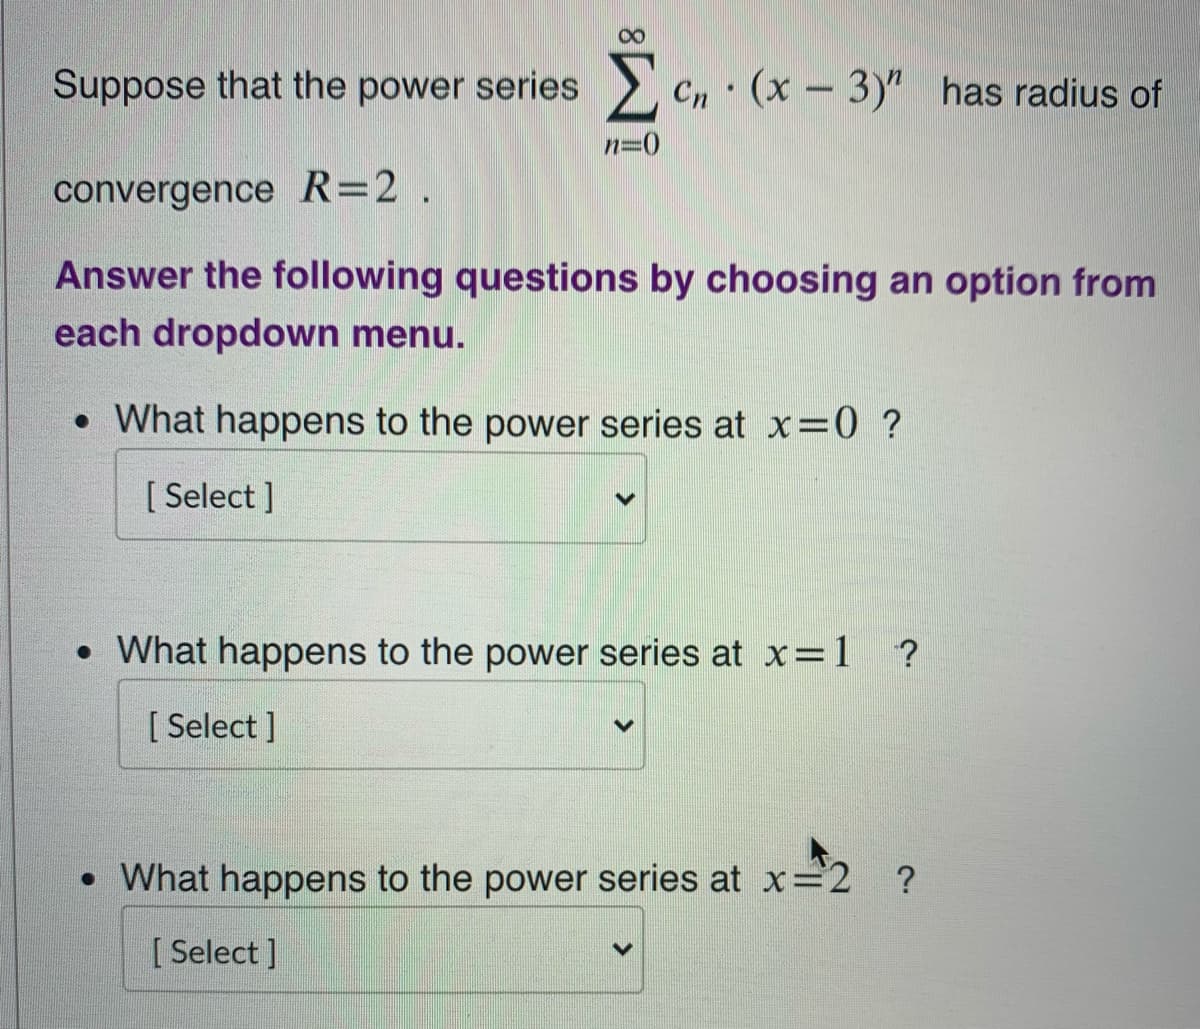 Suppose that the power series
Cn (x - 3)" has radius of
n=0
convergence R=2.
Answer the following questions by choosing an option from
each dropdown menu.
• What happens to the power series at x=0 ?
[ Select ]
• What happens to the power series at x=1 ?
[ Select ]
• What happens to the power series at x=2 ?
[ Select ]
